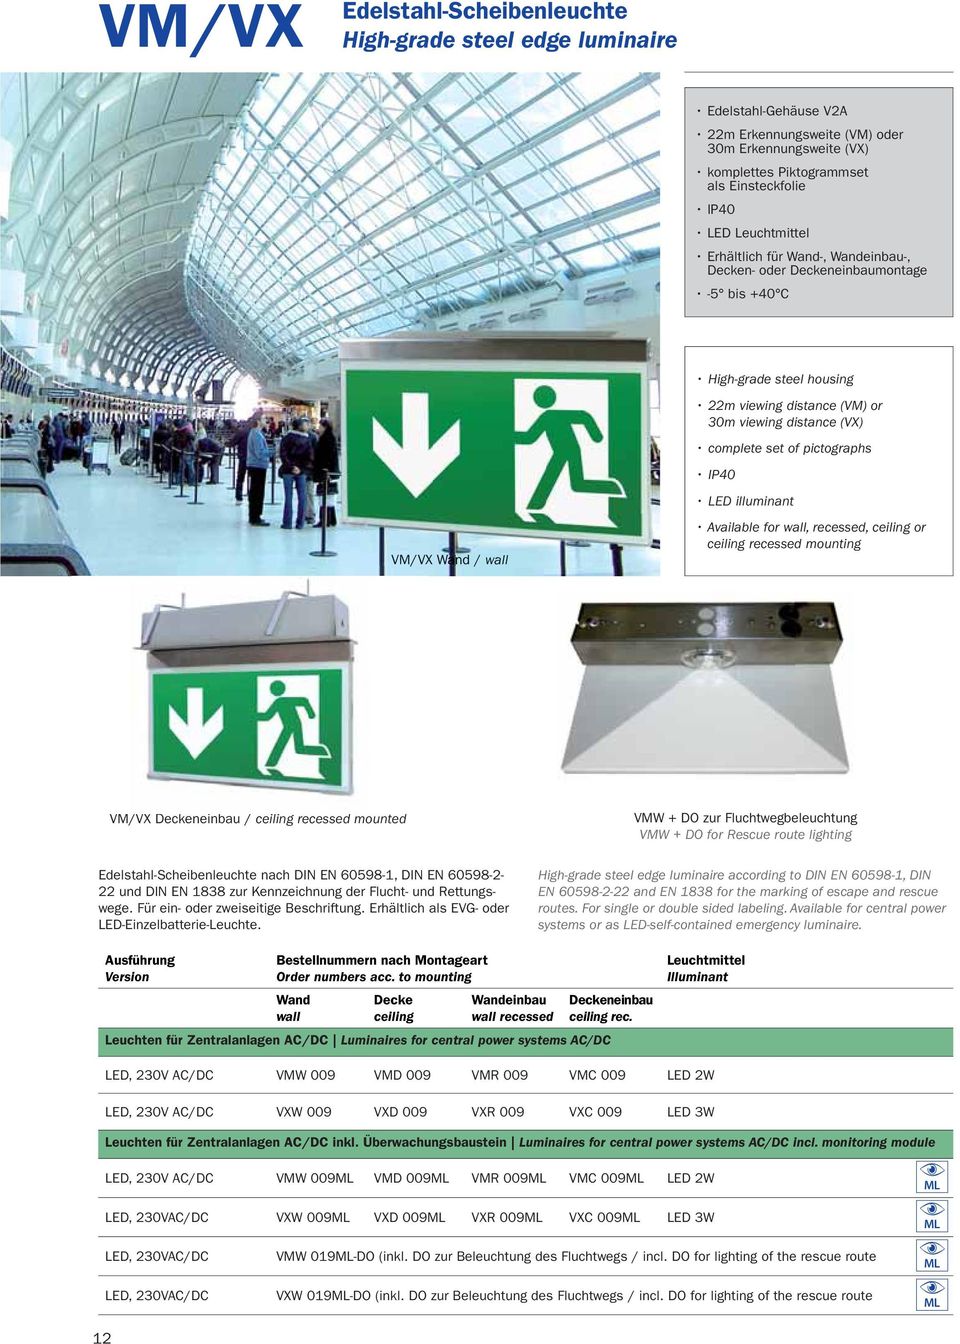 illuminant VM/VX VX Wand / wall l Available for wall, recessed, ceiling or ceiling recessed mounting VM/VX Deckeneinbau / ceiling recessed mounted Edelstahl-Scheibenleuchte nach DIN EN 60598-1, DIN